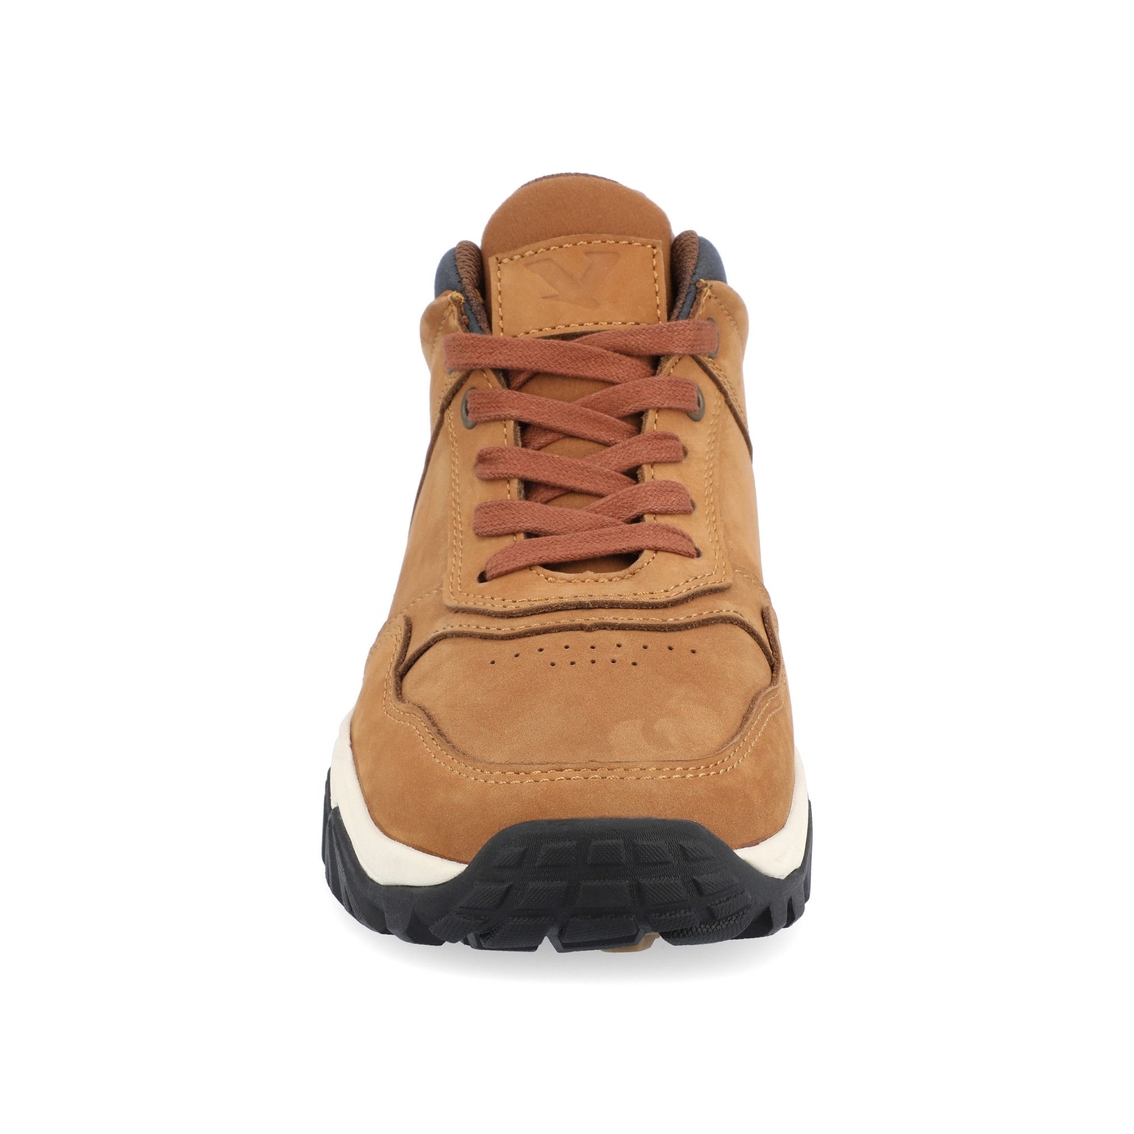 Territory Beacon Casual Leather Sneaker - Image 2 of 5